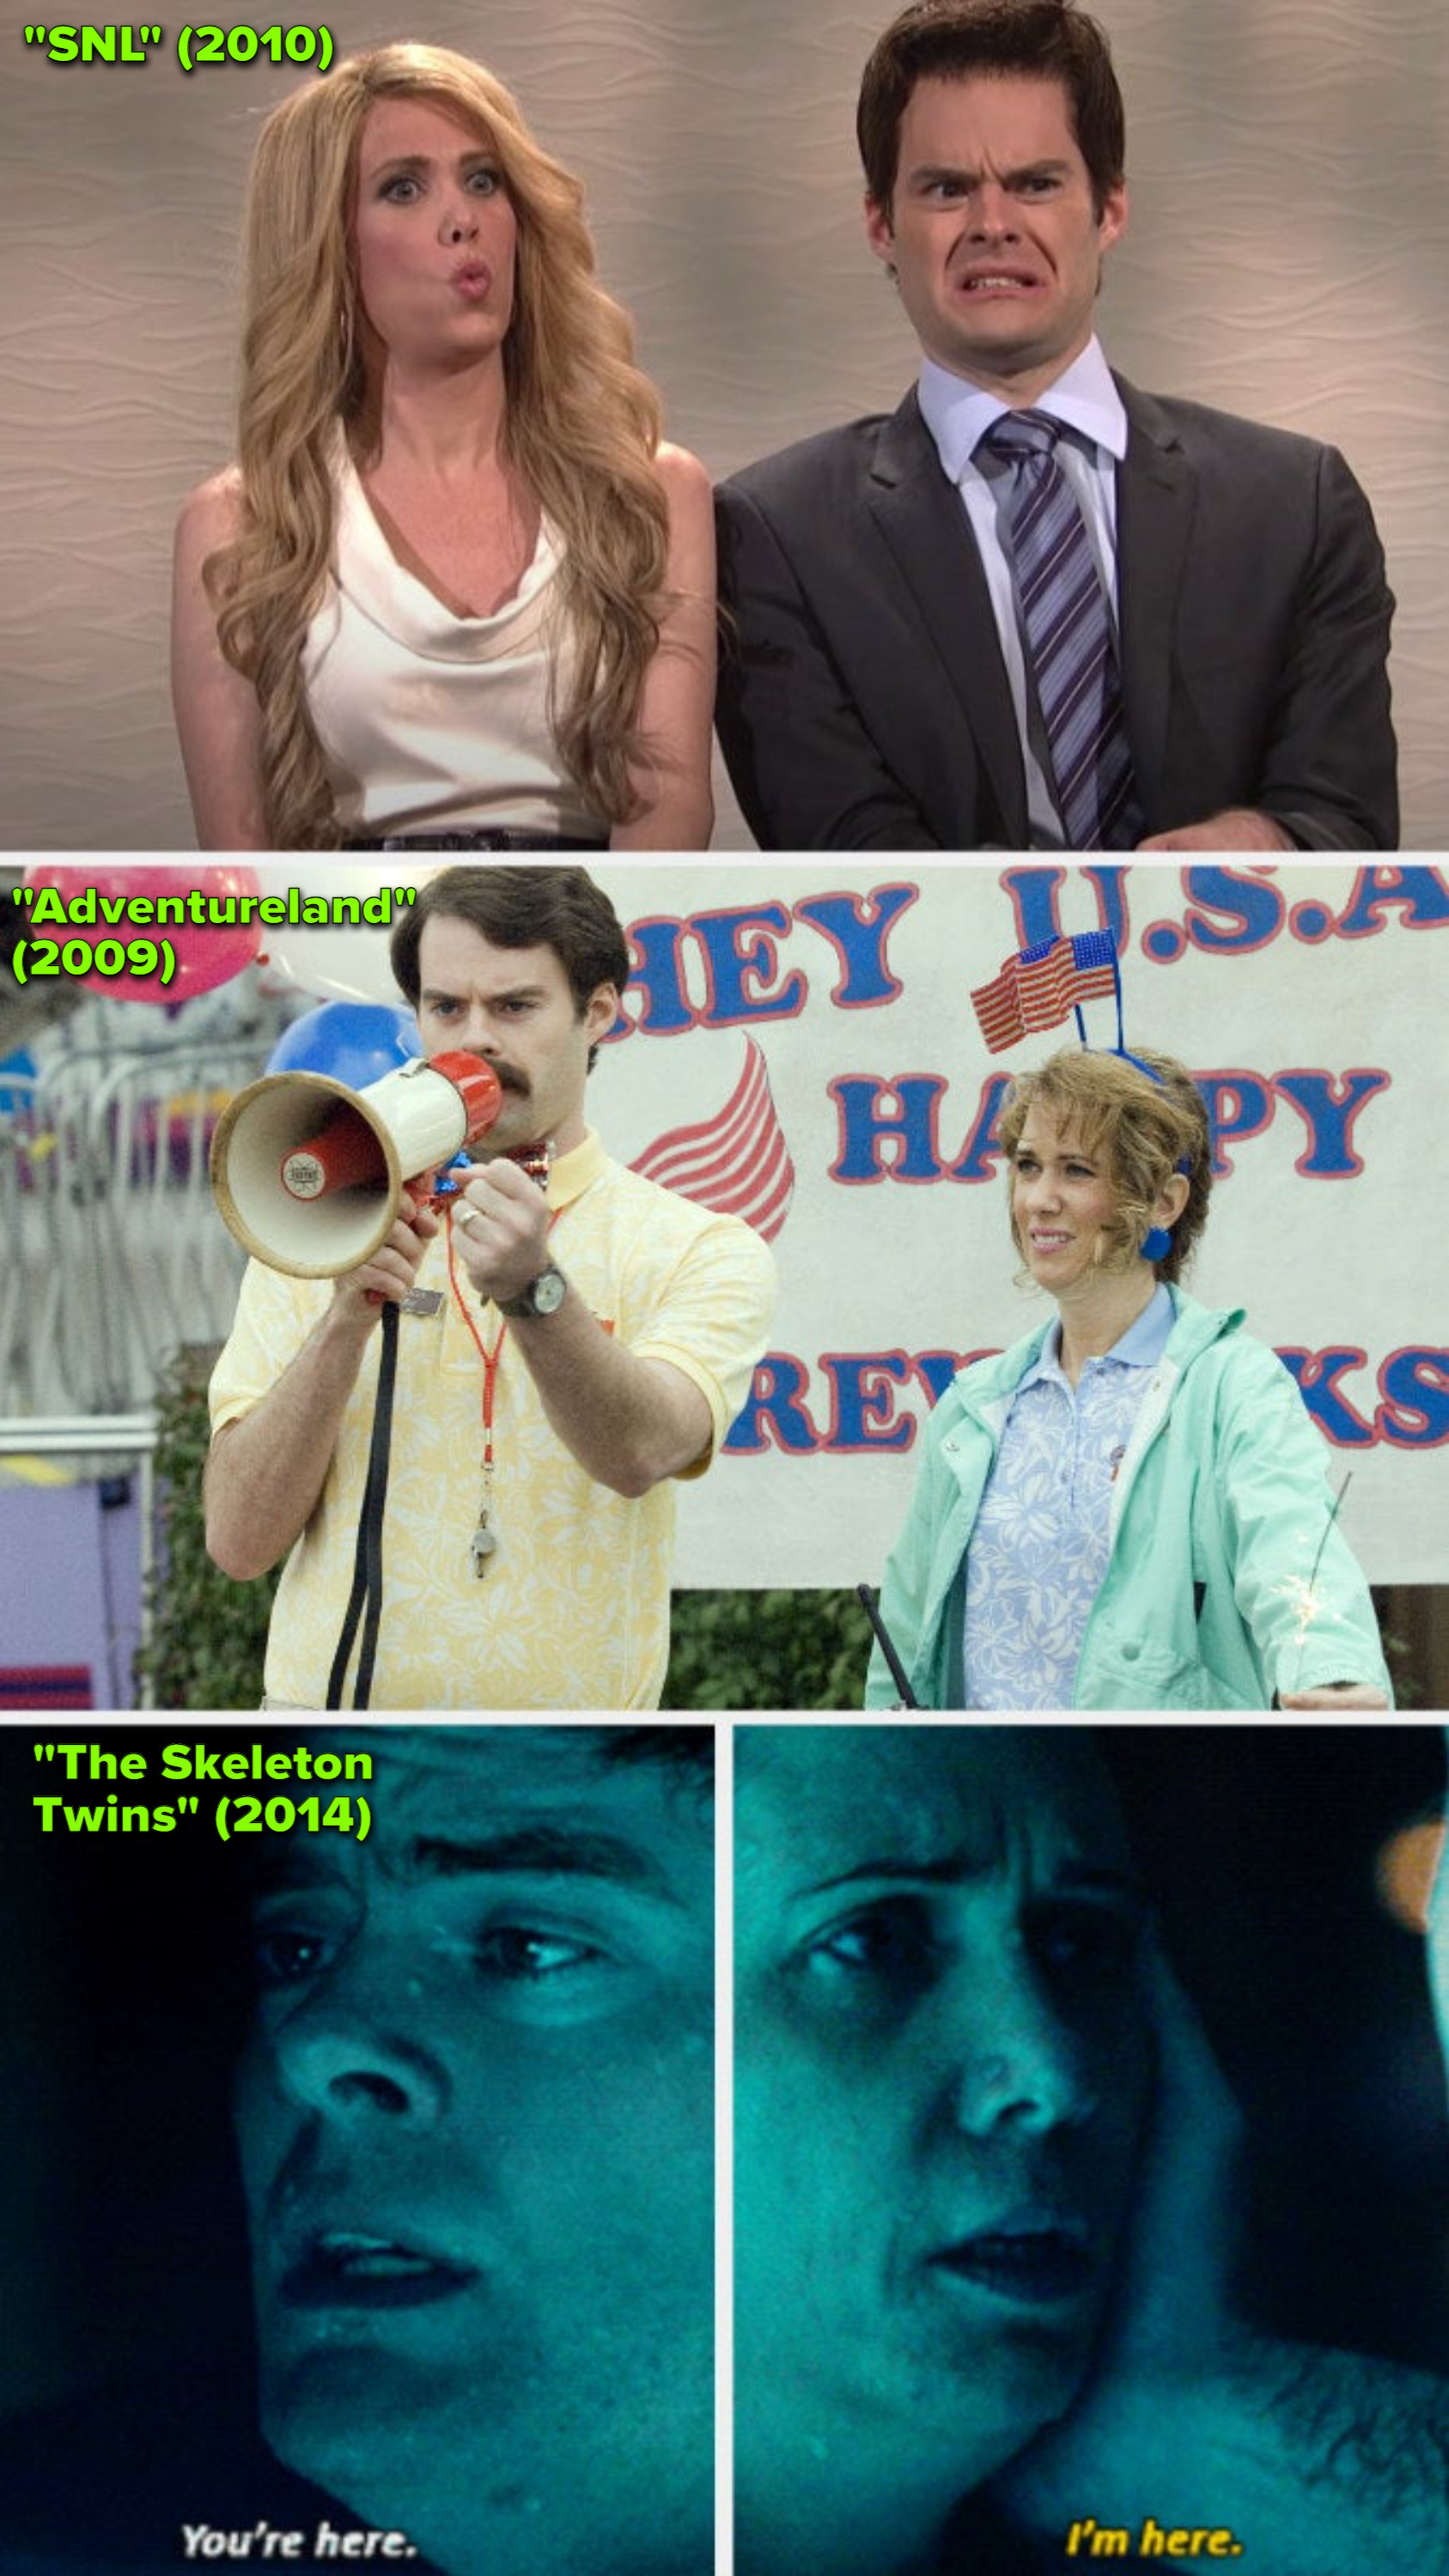 Hader and Wiig on &quot;SNL;&quot; Hader and Wiig in &quot;Adventureland;&quot; Hader and Wiig in &quot;The Skeleton Twins&quot;